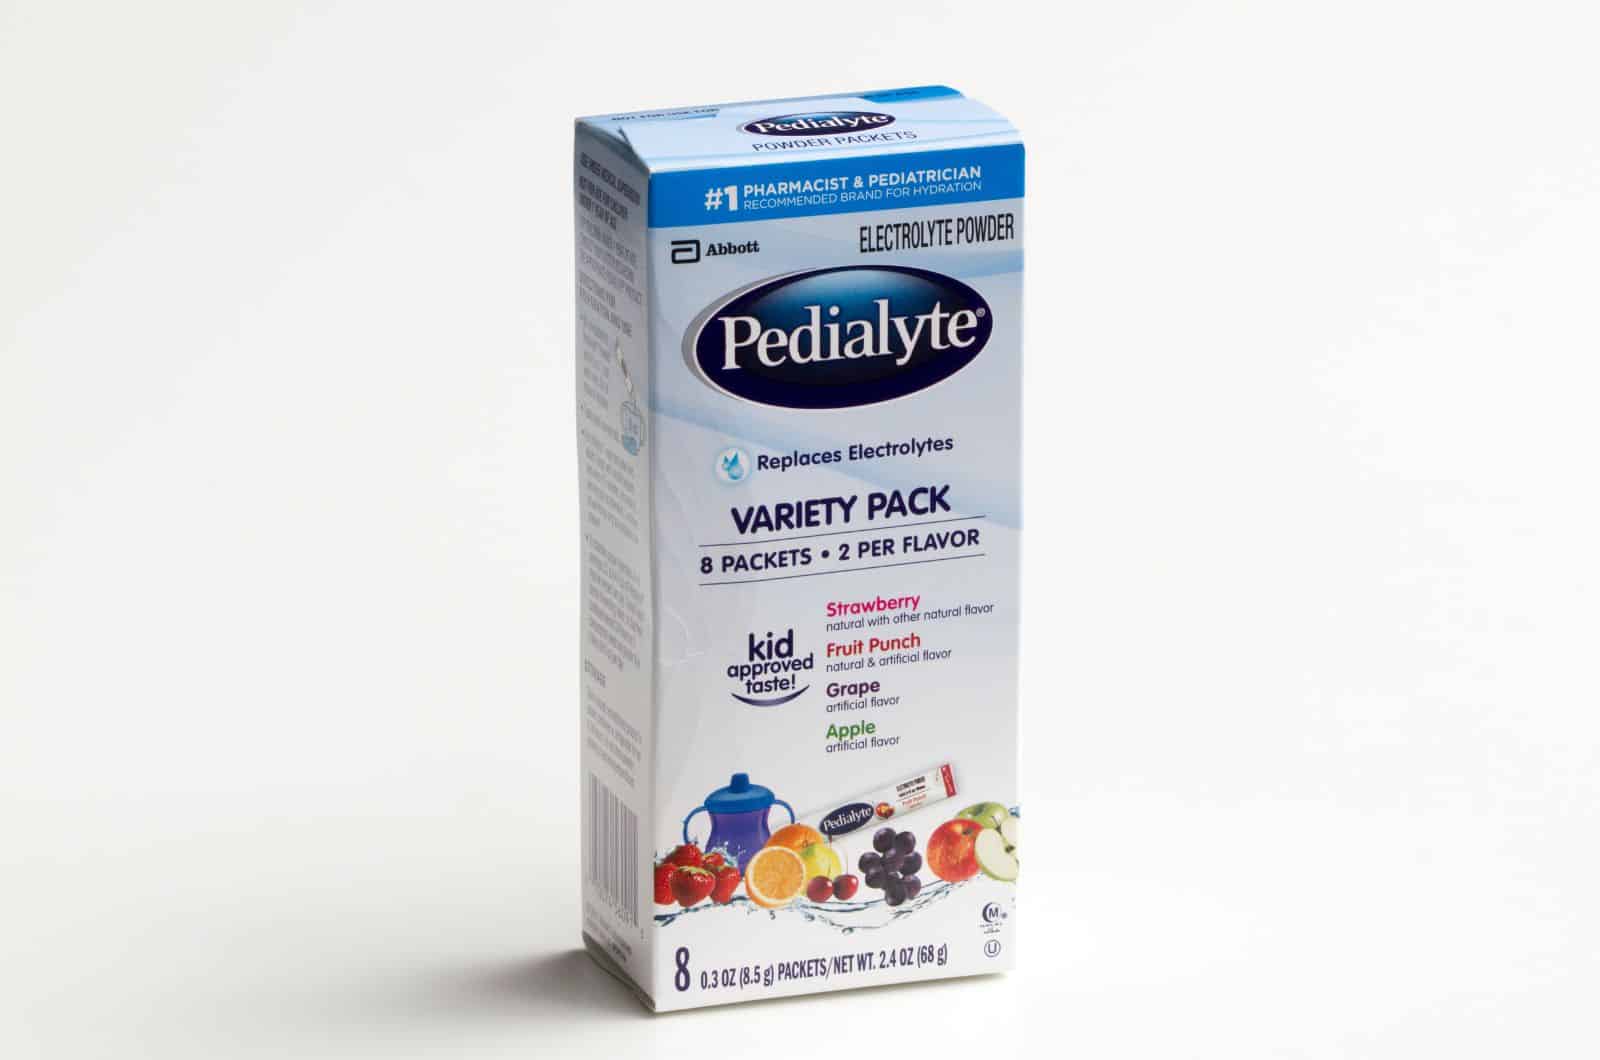 Pedialyte with white background